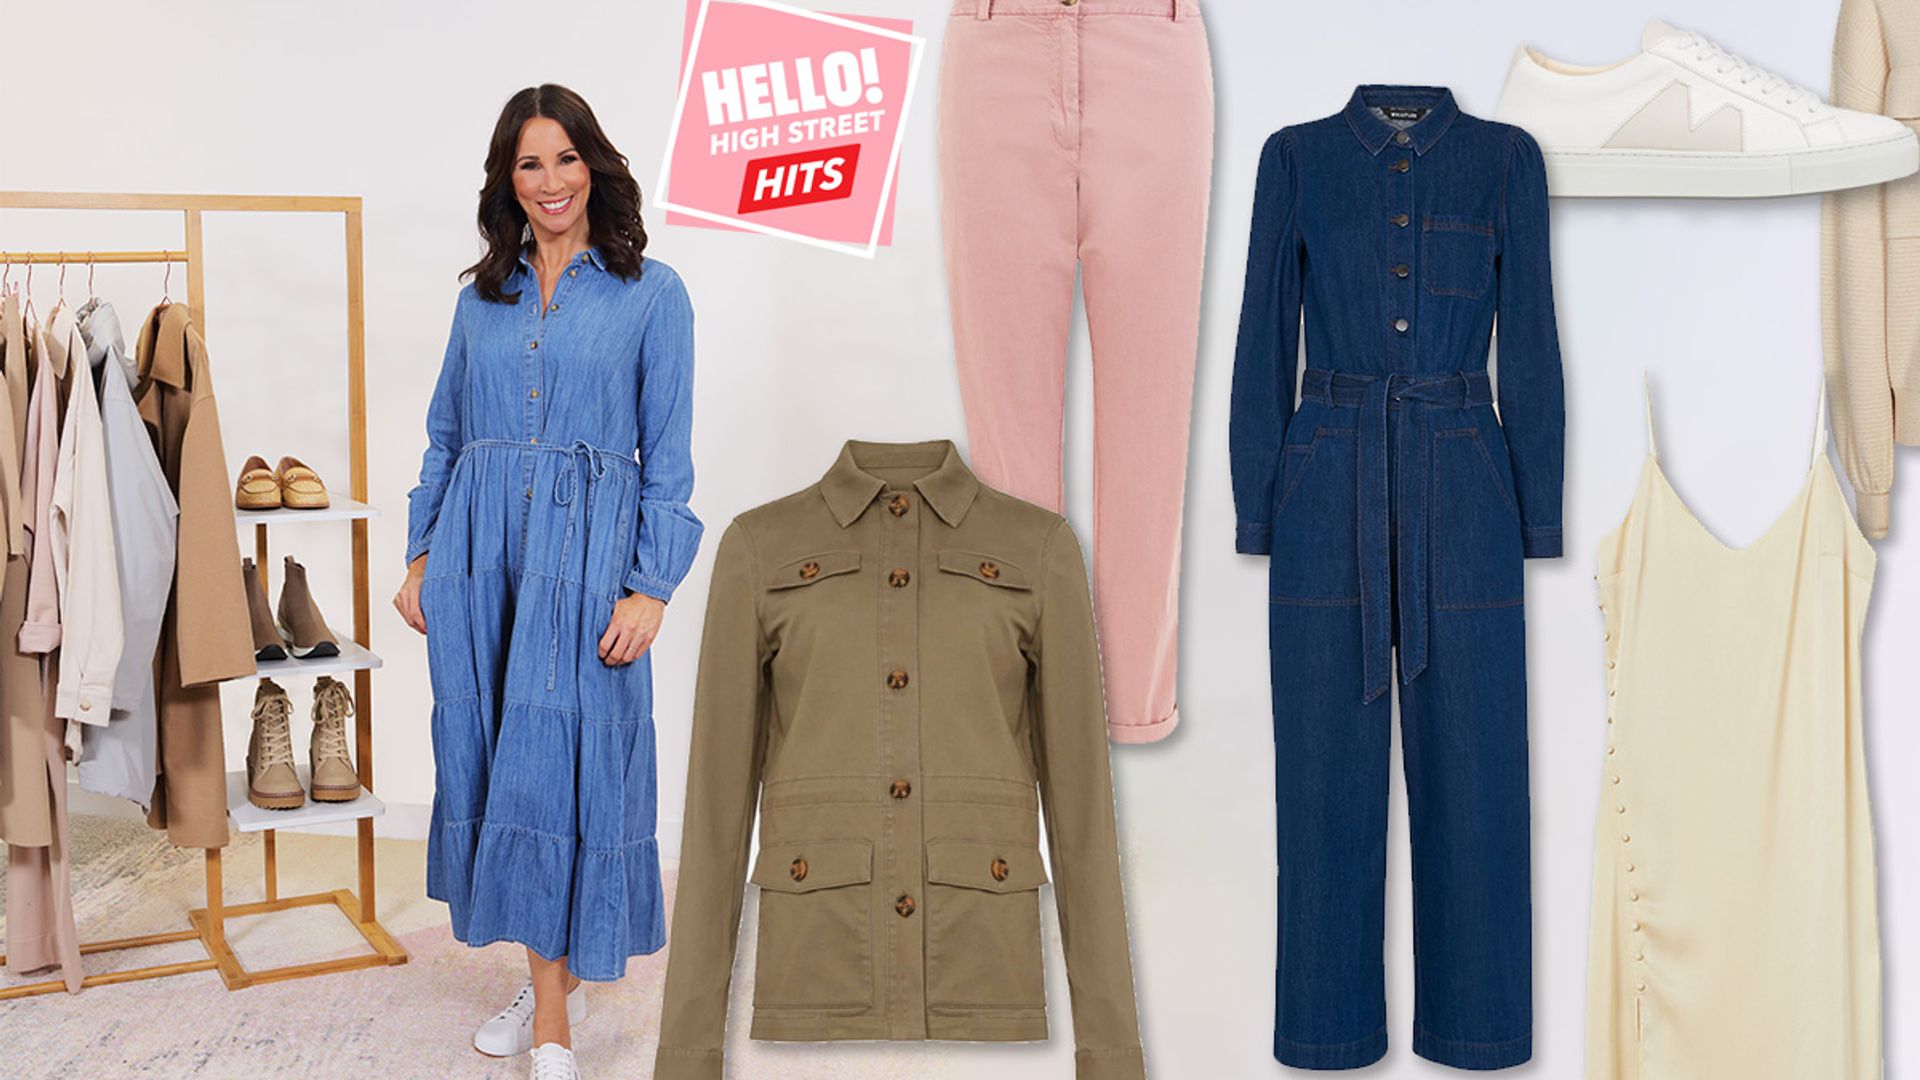 Andrea McLean's M&S dress is a figure-flattering must-have